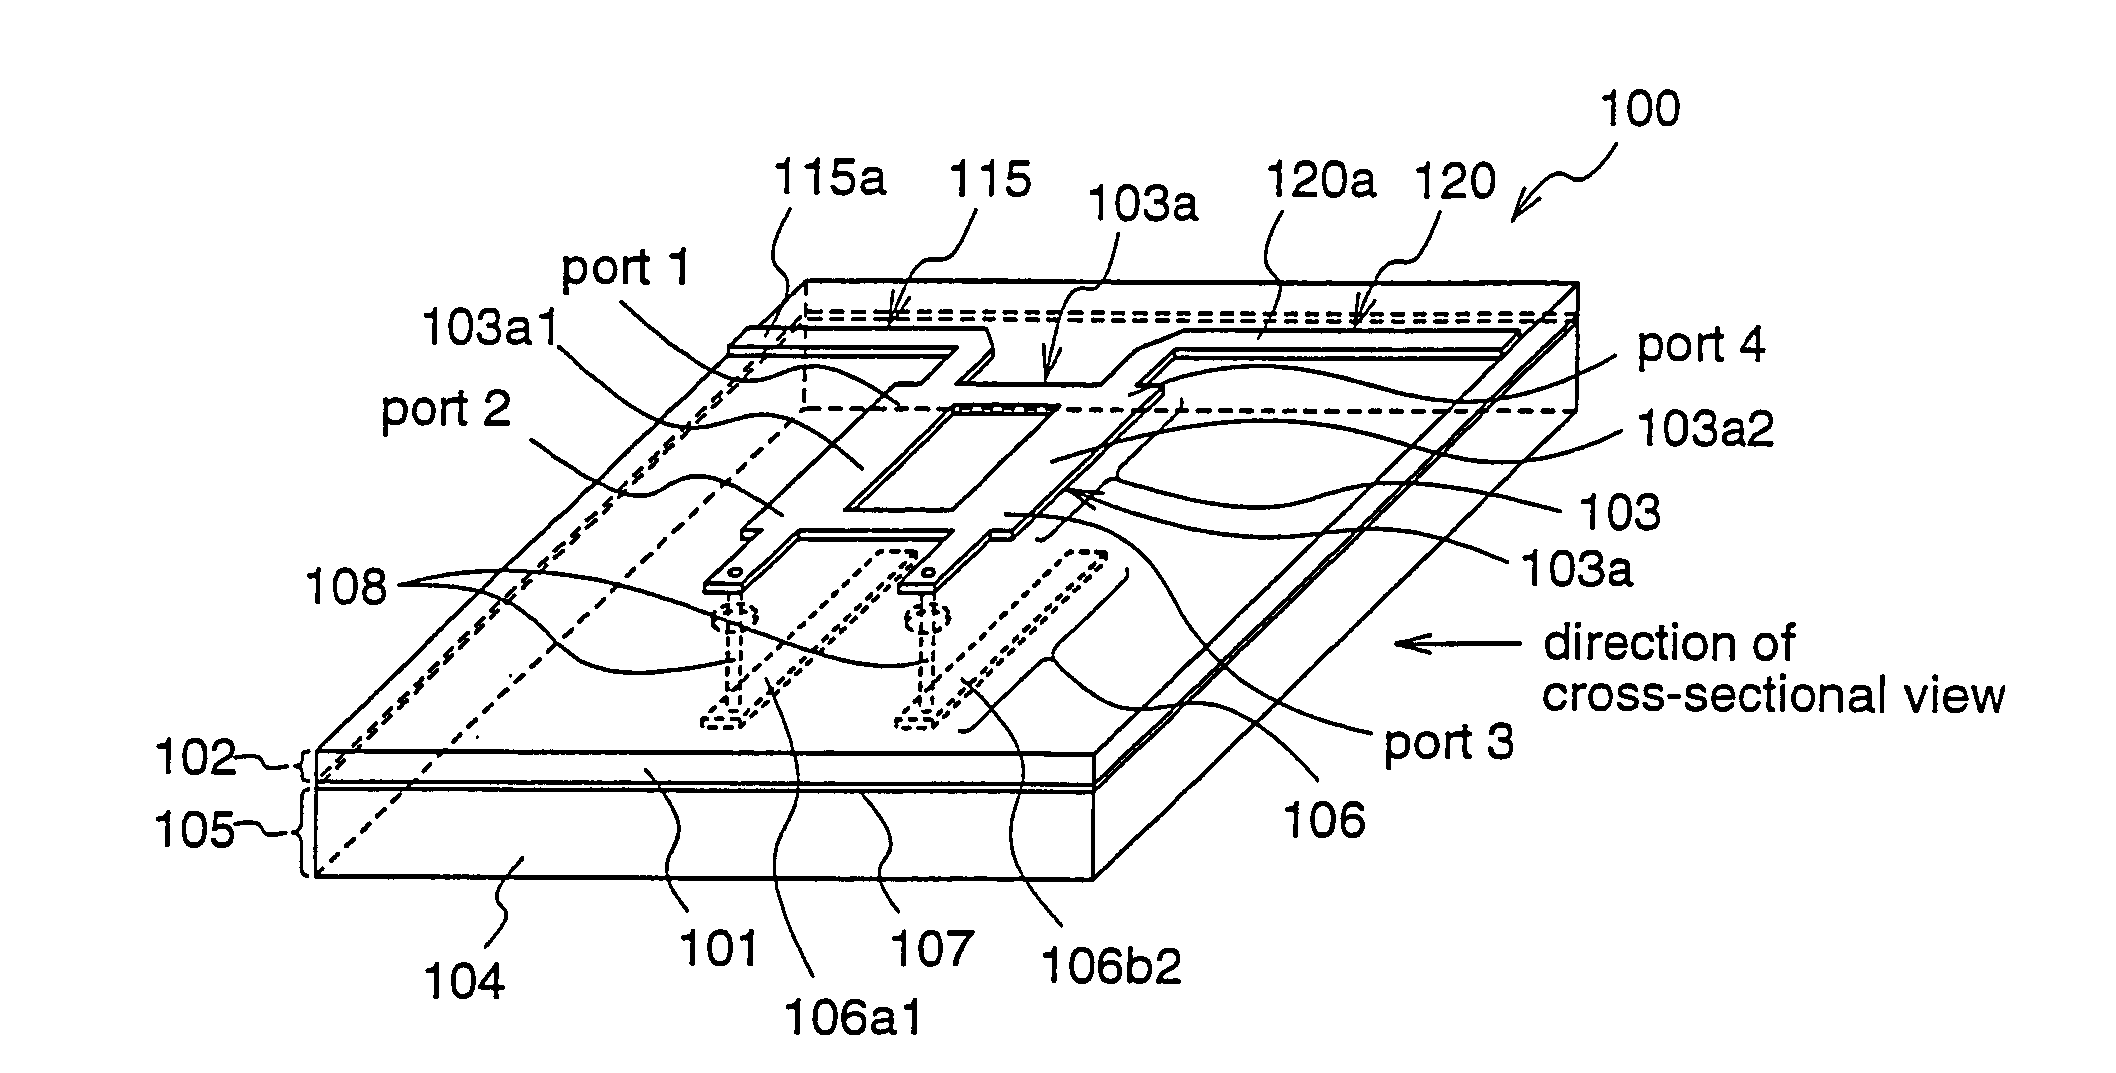 Antenna control unit and phased-array antenna